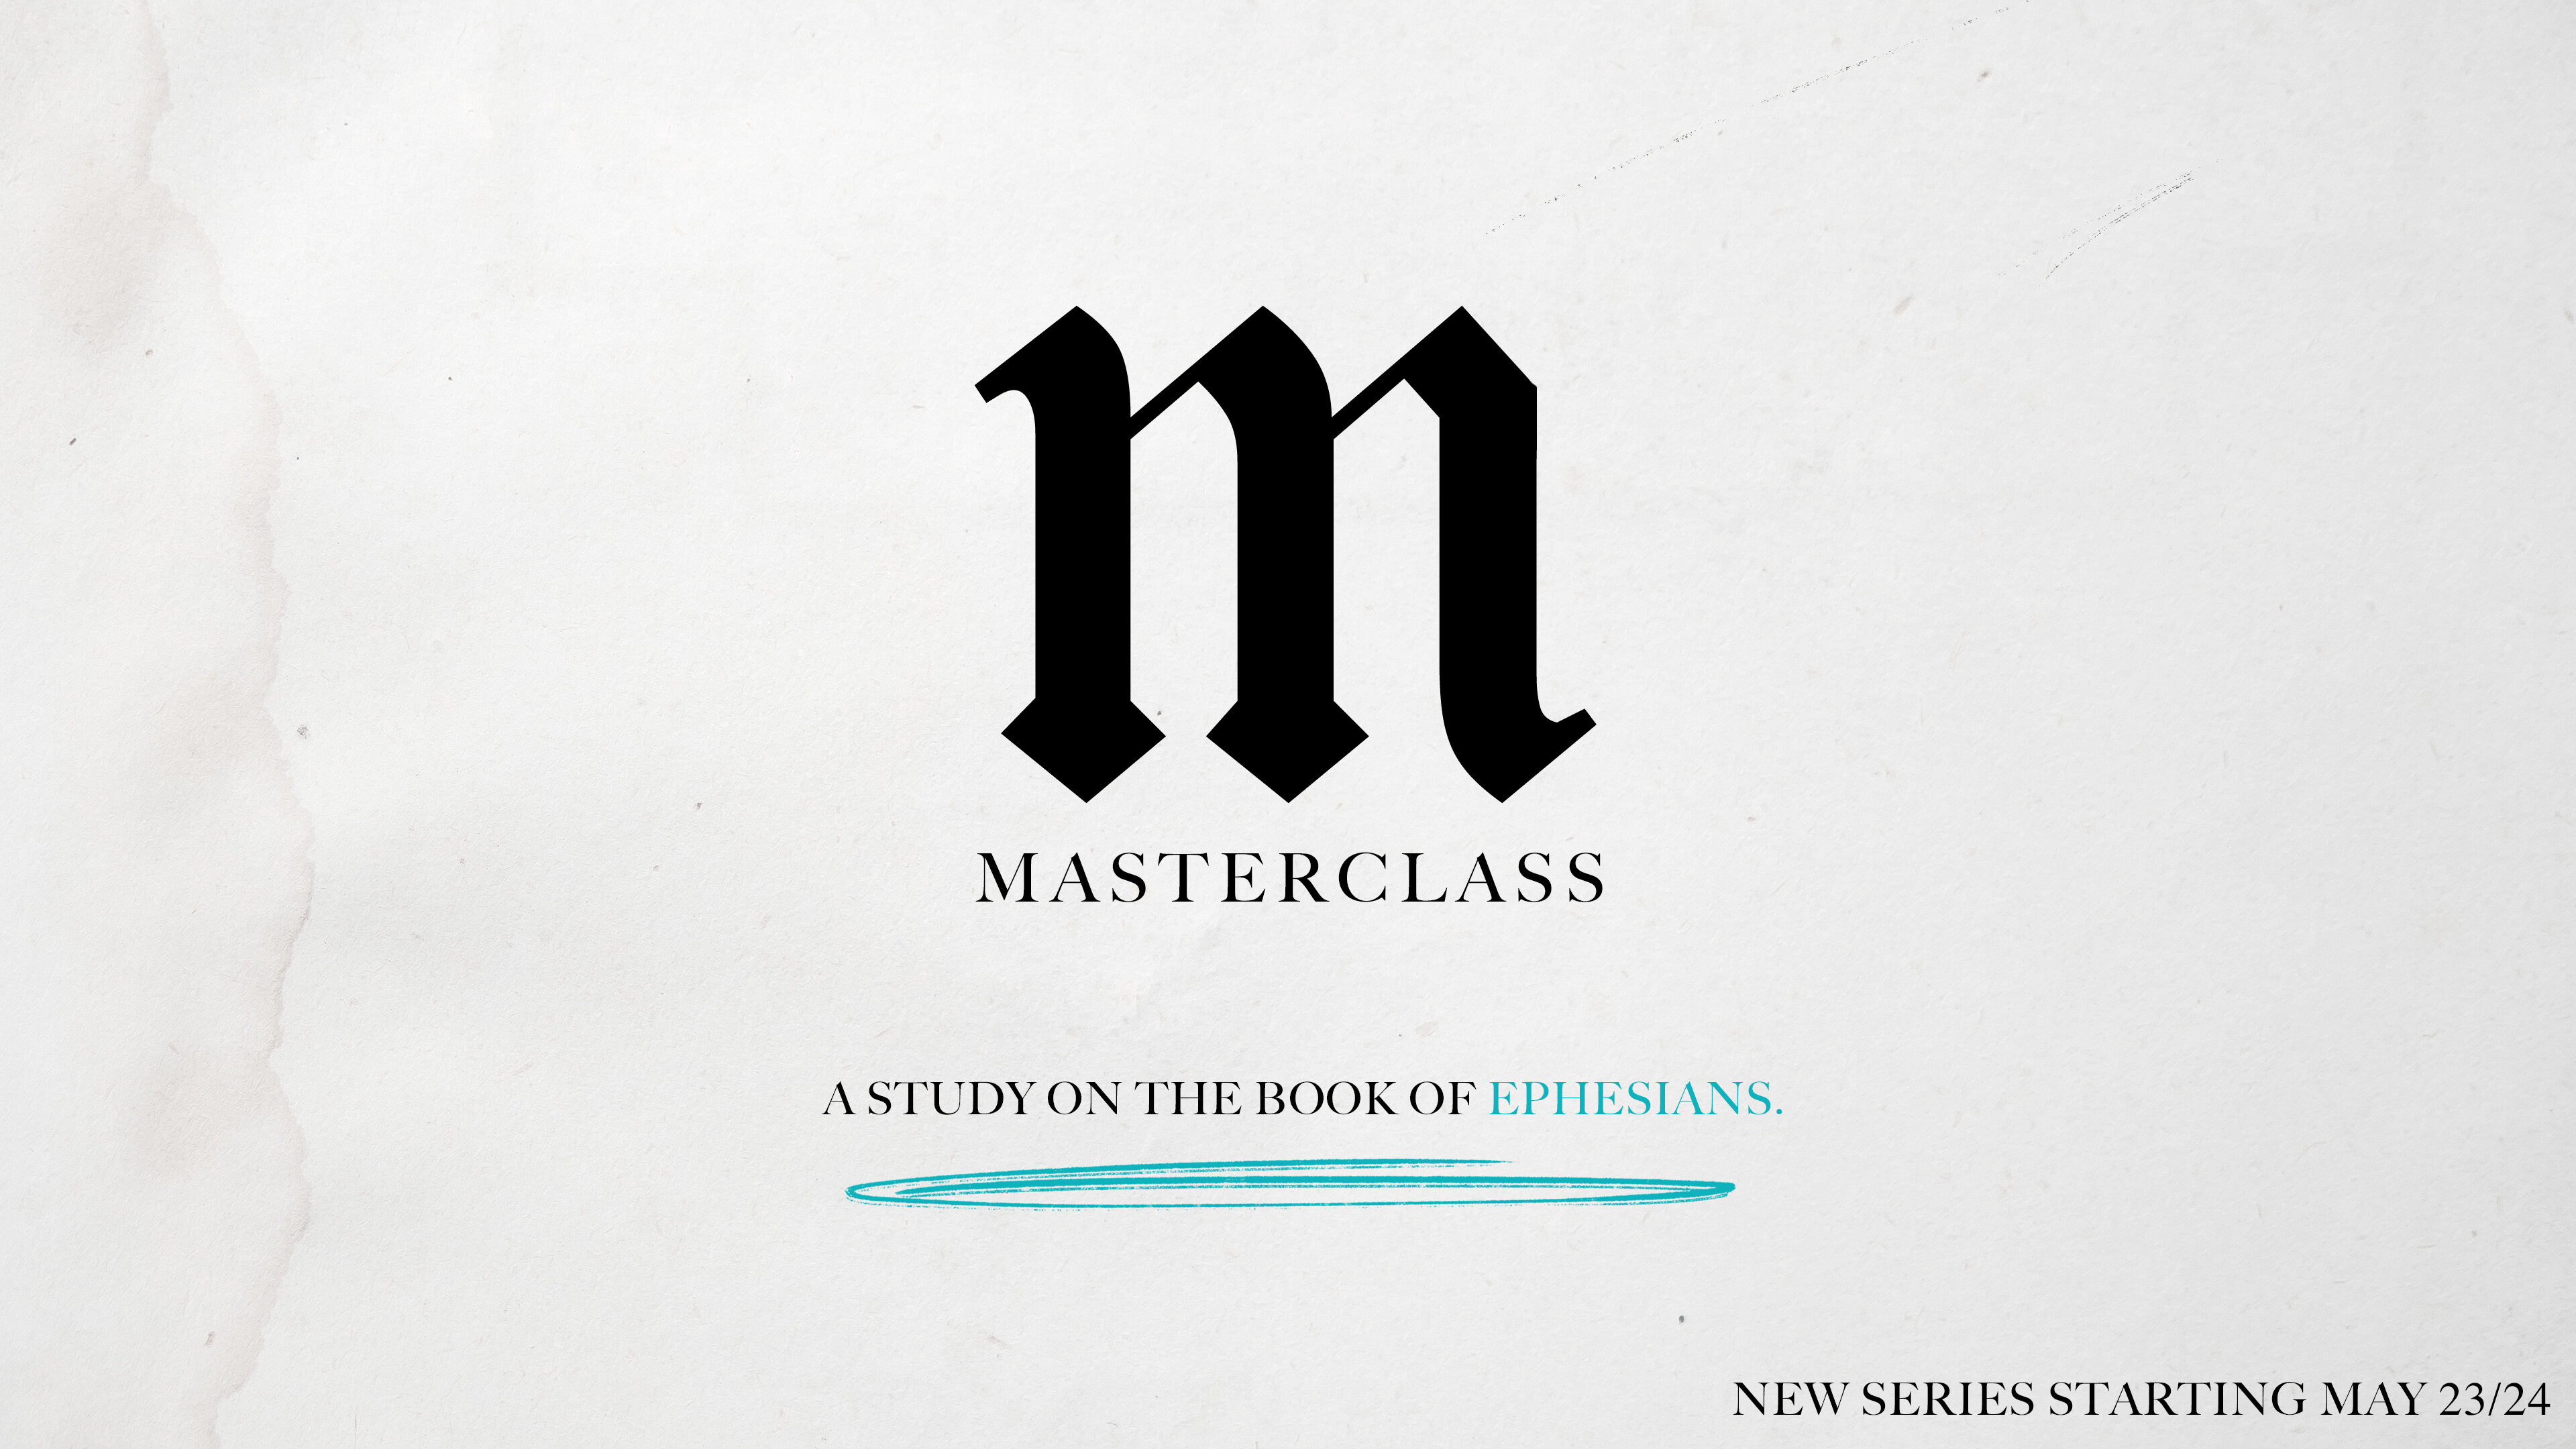 Masterclass: A Study on the Book of Ephesians